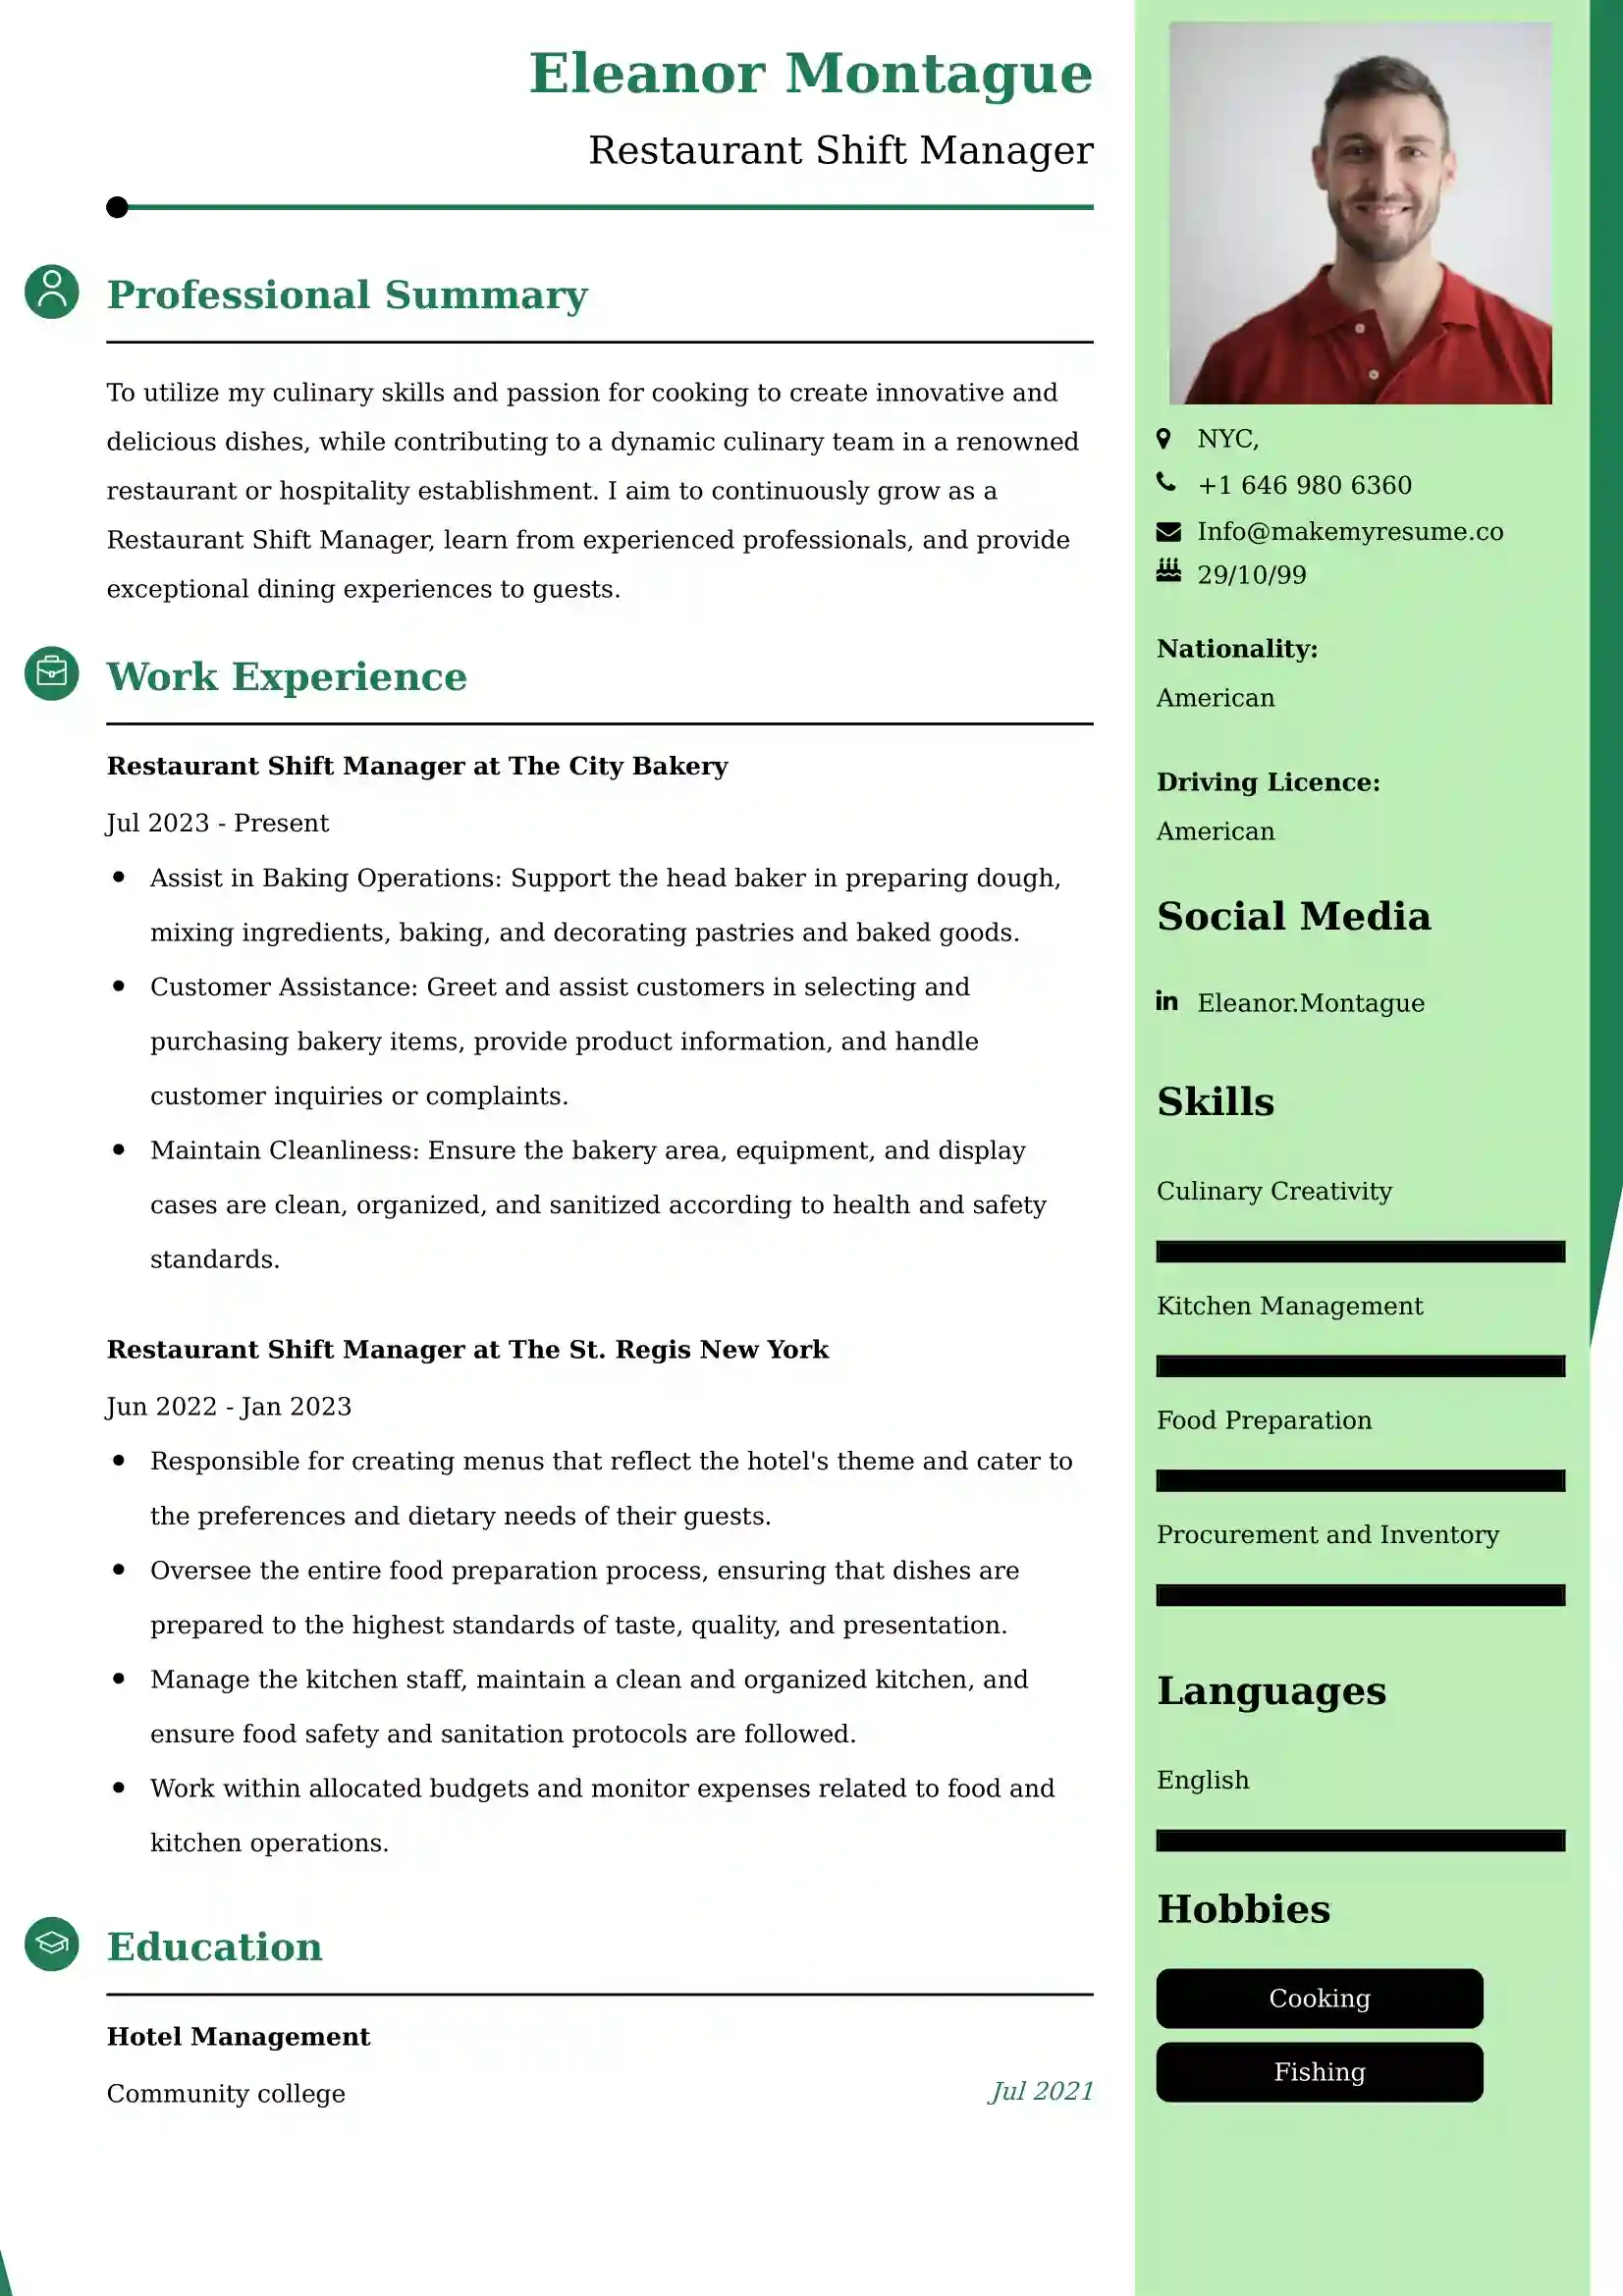 Restaurant Shift Manager CV Examples Malaysia